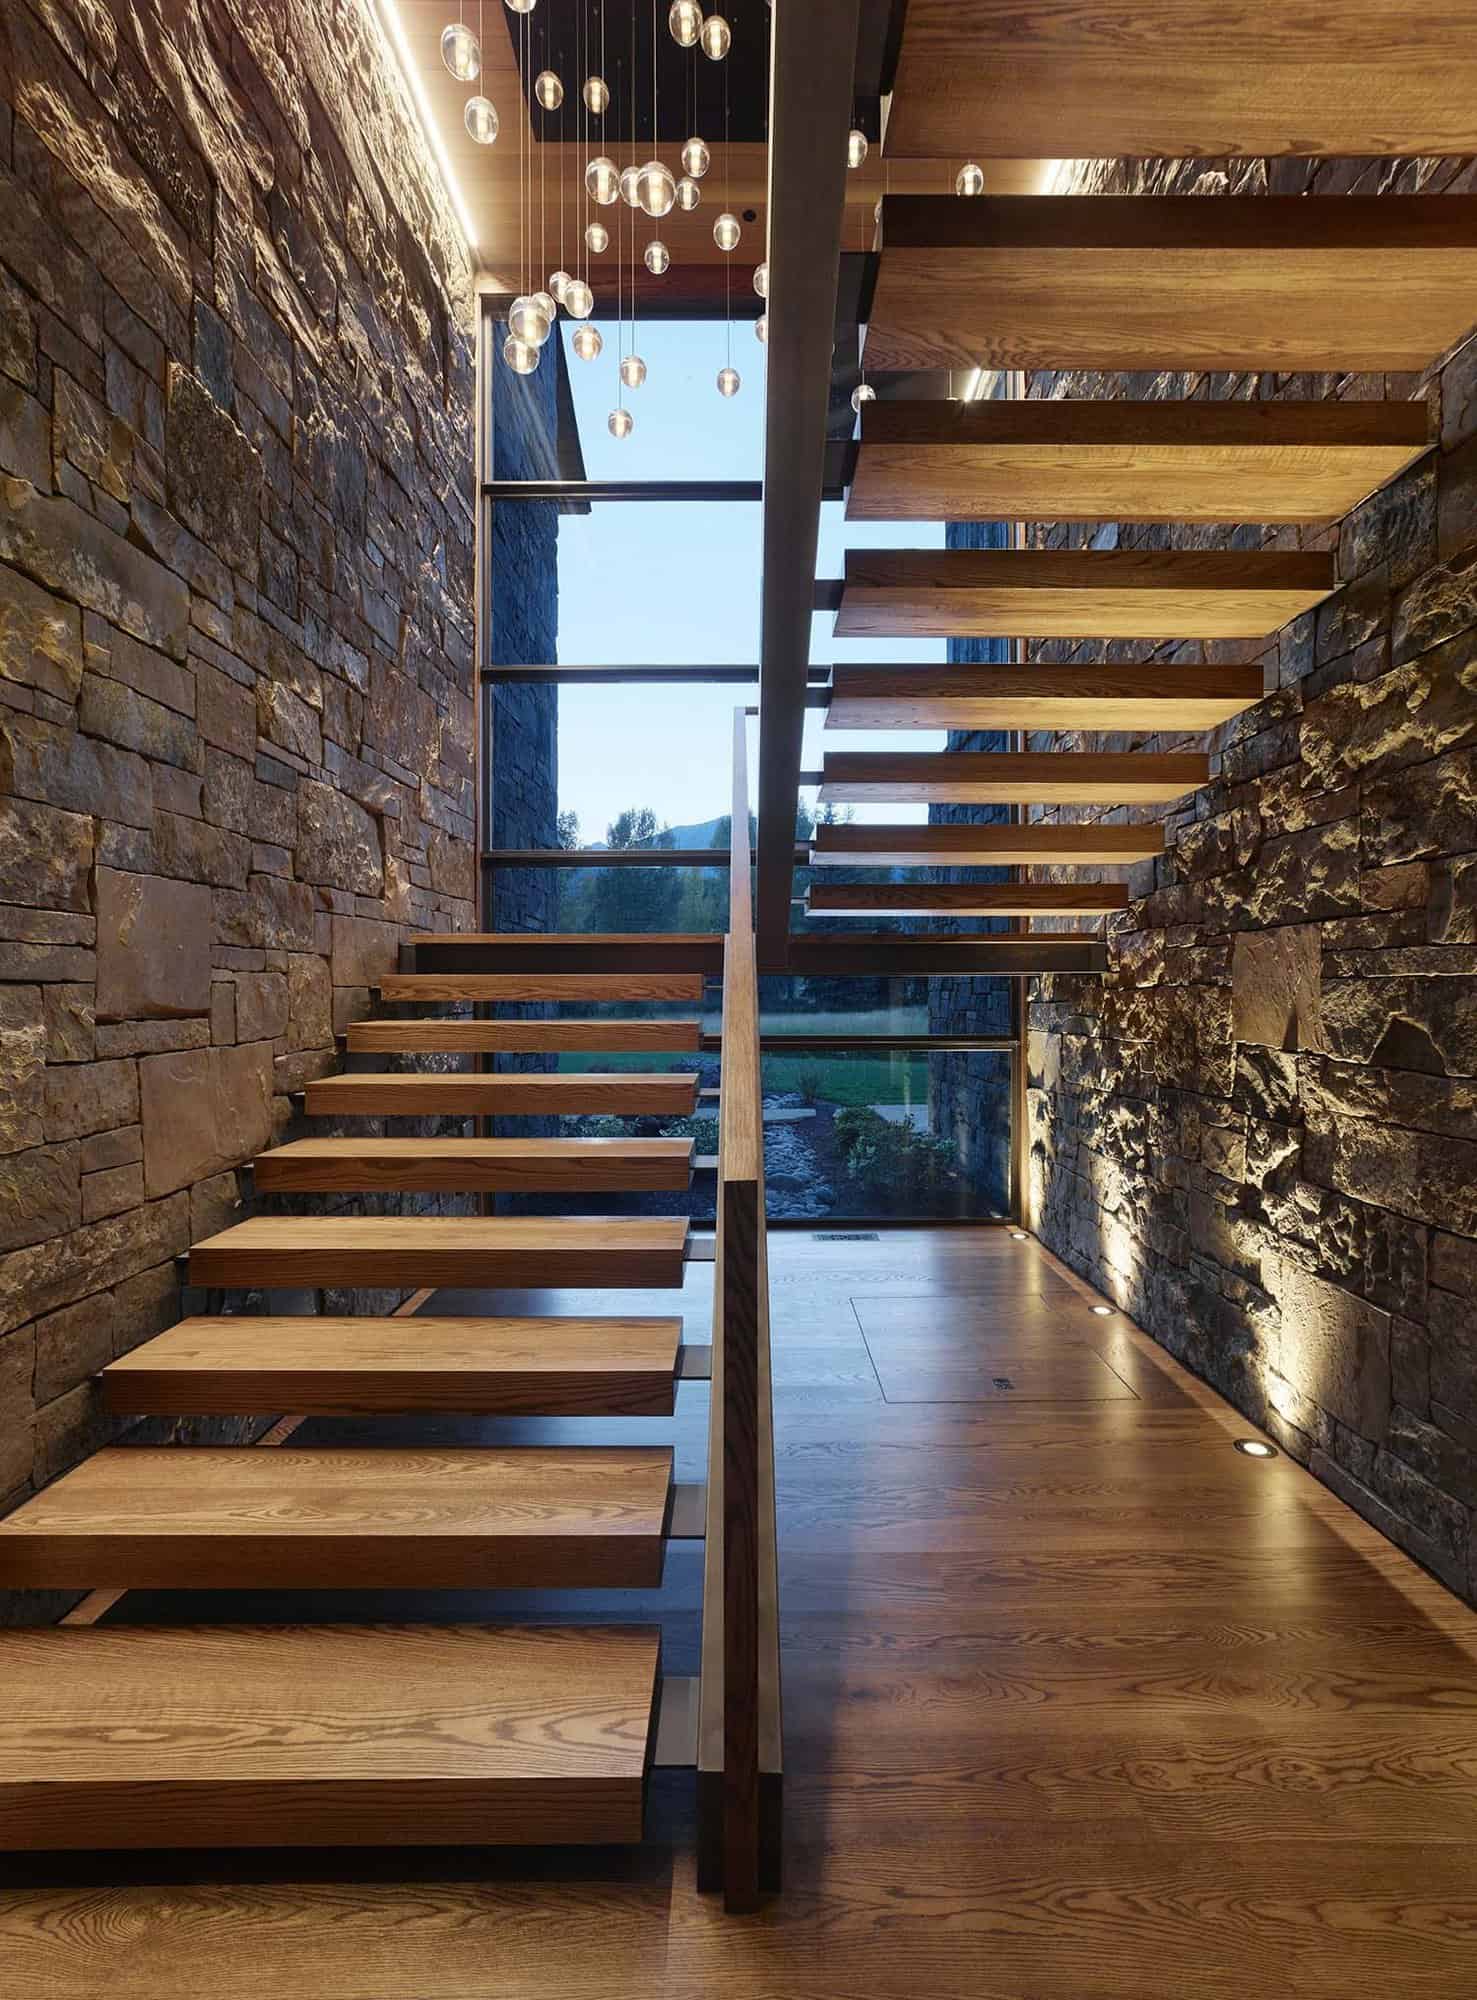 modern rustic staircase at dusk